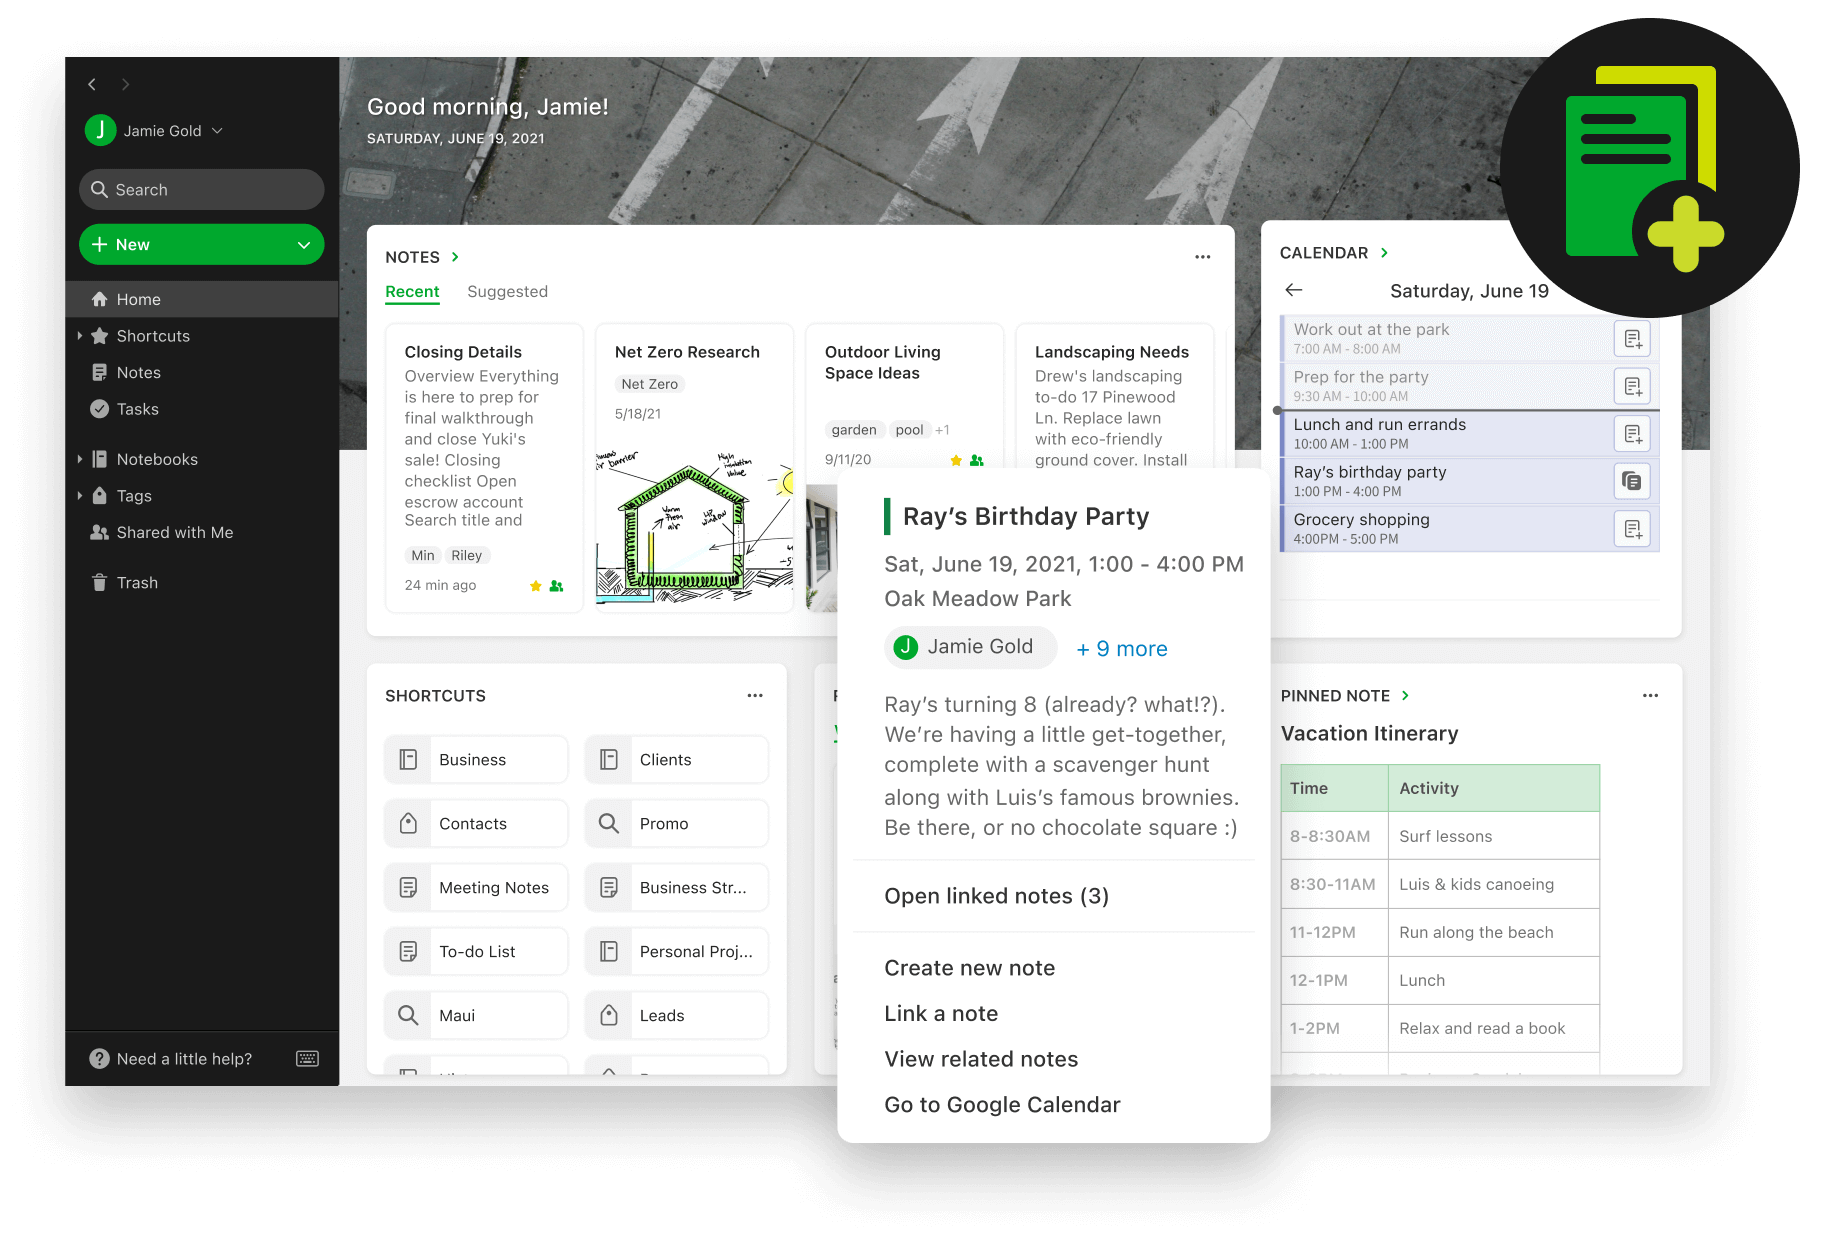 Image of calendar and linked meeting notes